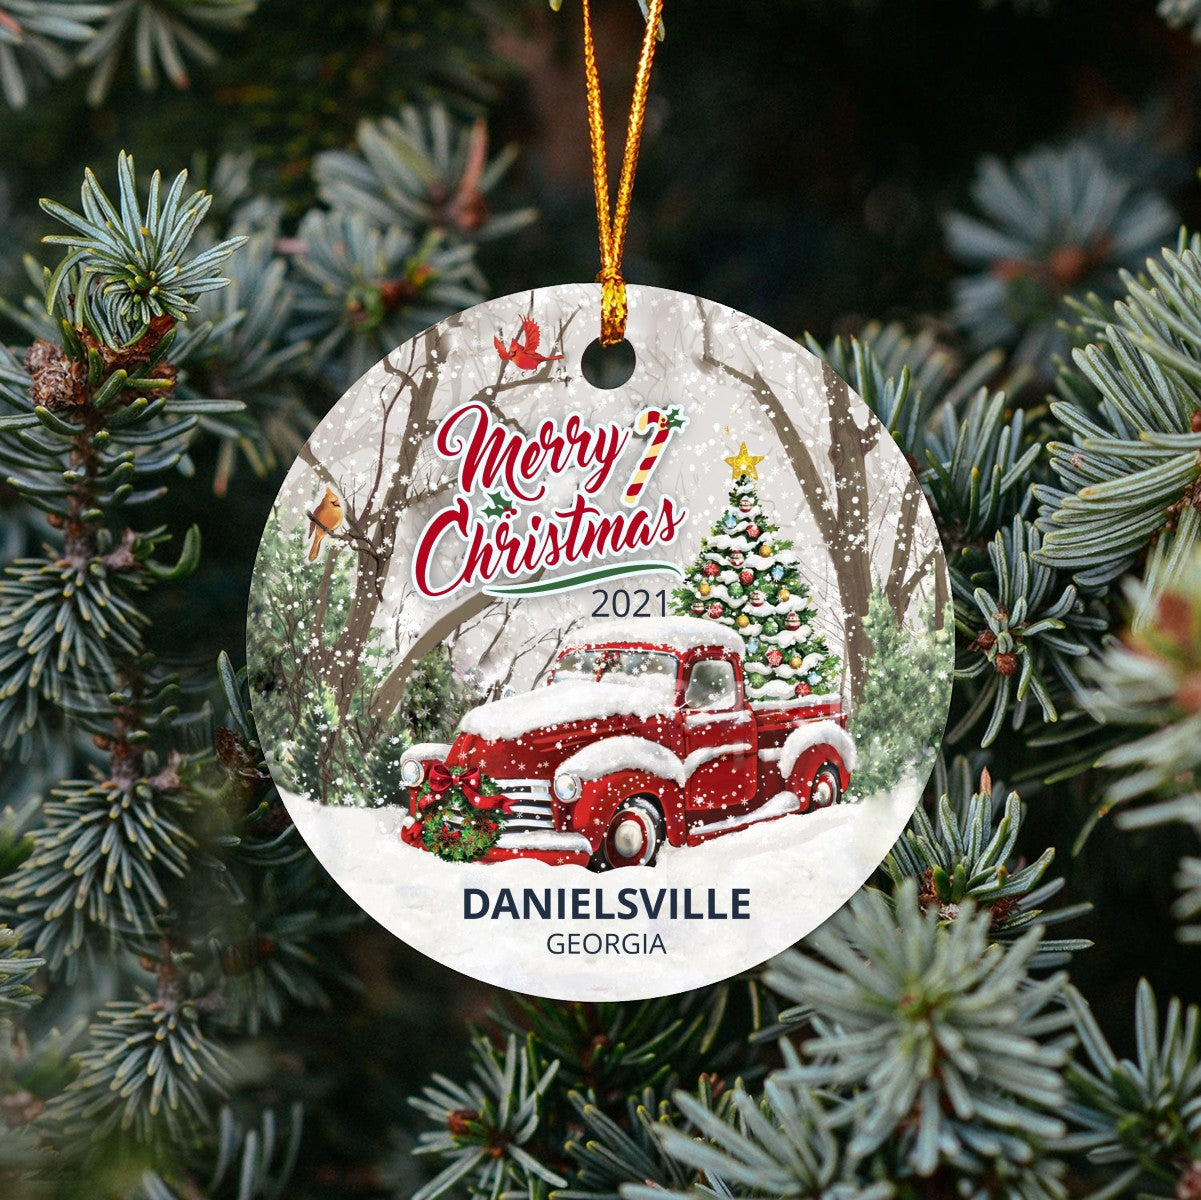 Christmas Tree Ornaments Danielsville - Ornament With Name City, State Danielsville Georgia GA Ornament - Red Truck Xmas Ornaments 3'' Plastic Gift For Family, Friend And Housewarming